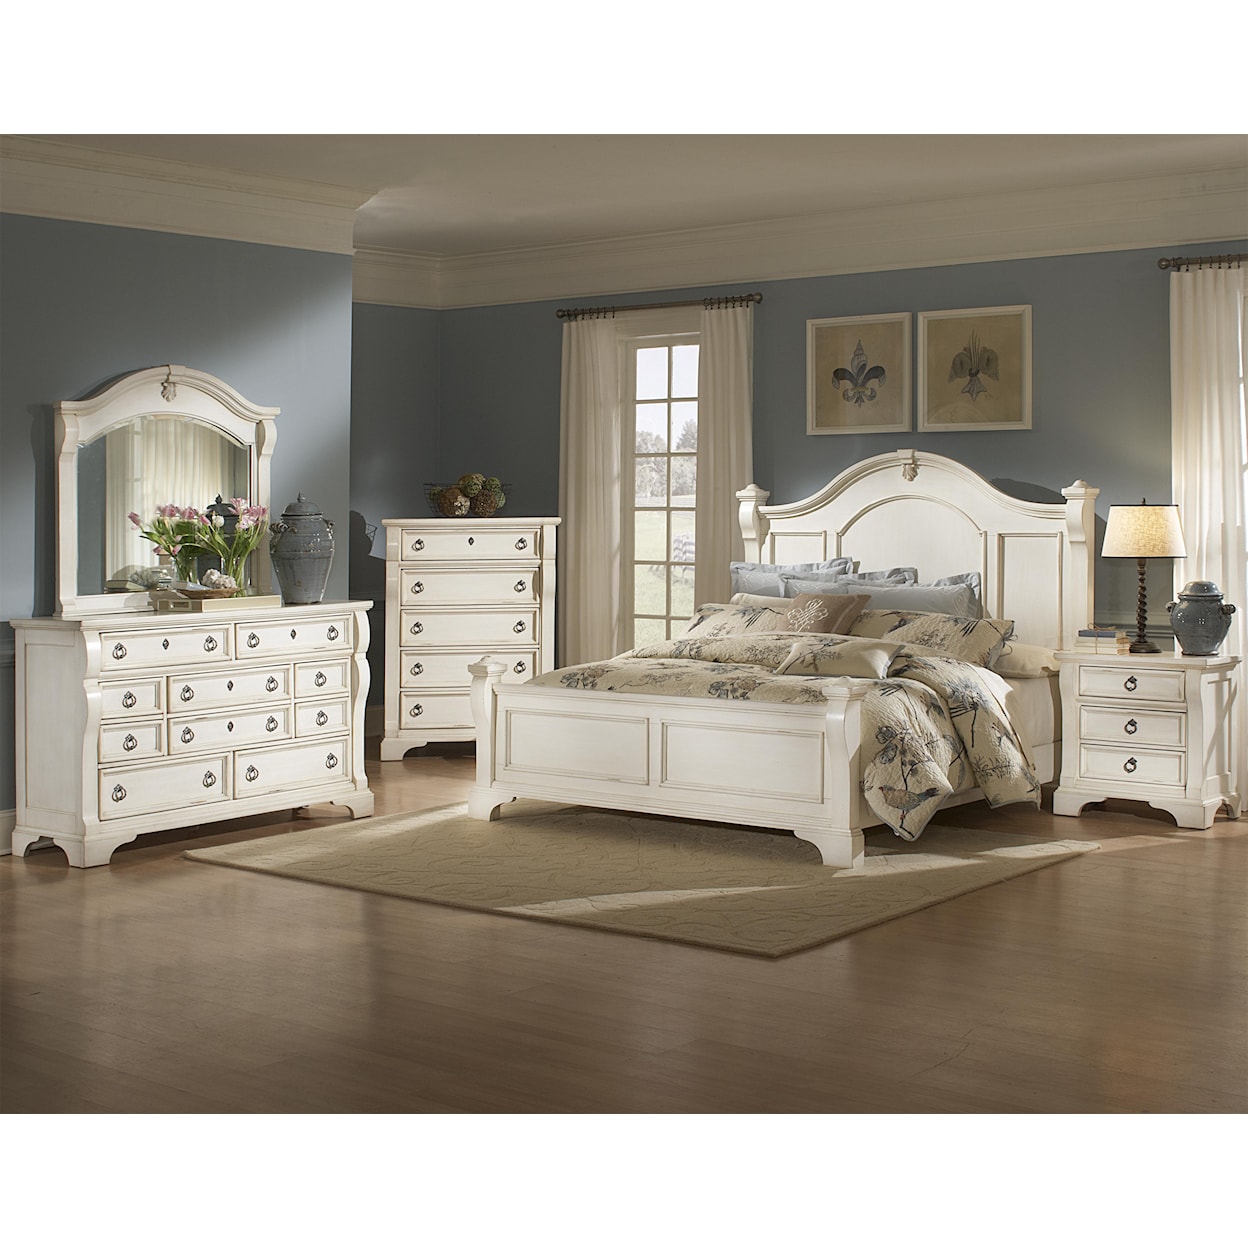 American Woodcrafters Heirloom King Poster Bed